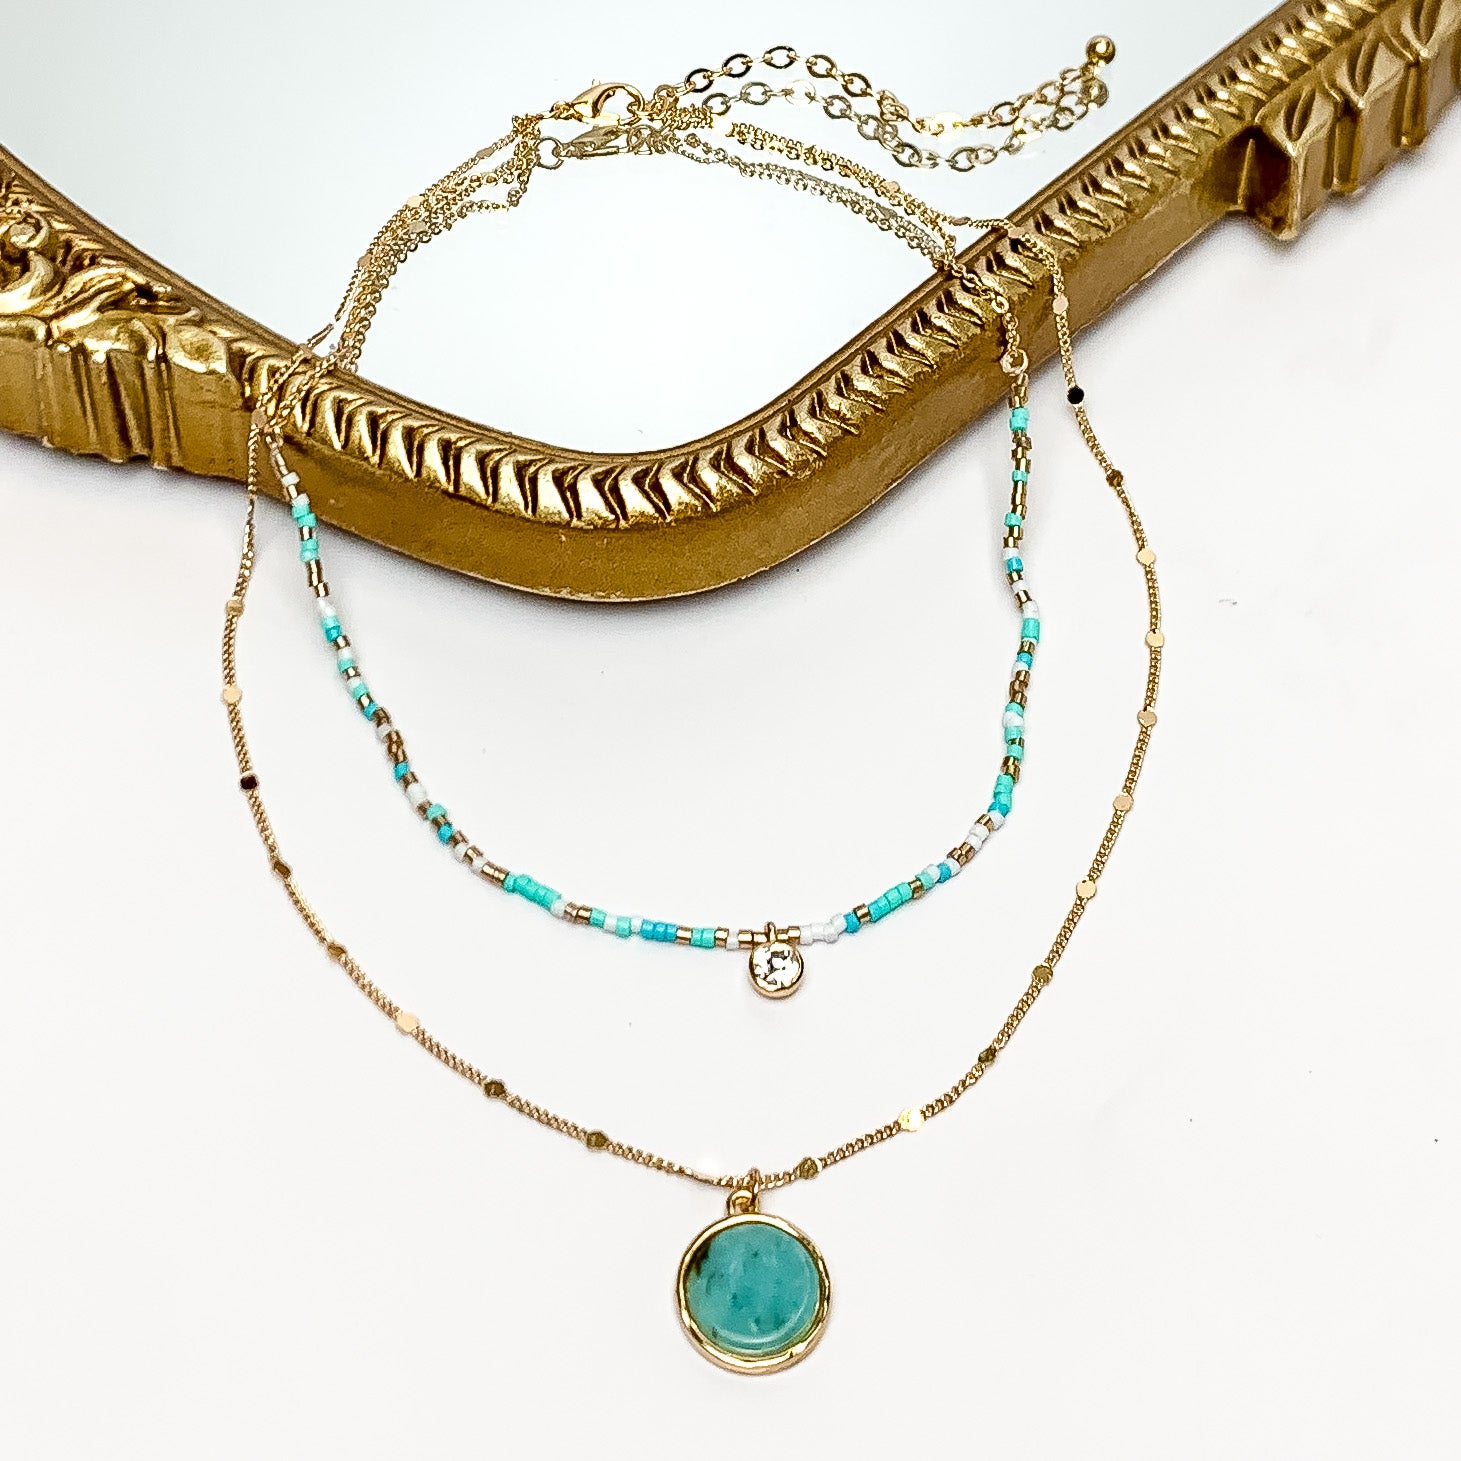 Turquoise Goddess Gold Tone Double Chain Necklace. Pictured on a white background with a mirror behind the necklace.